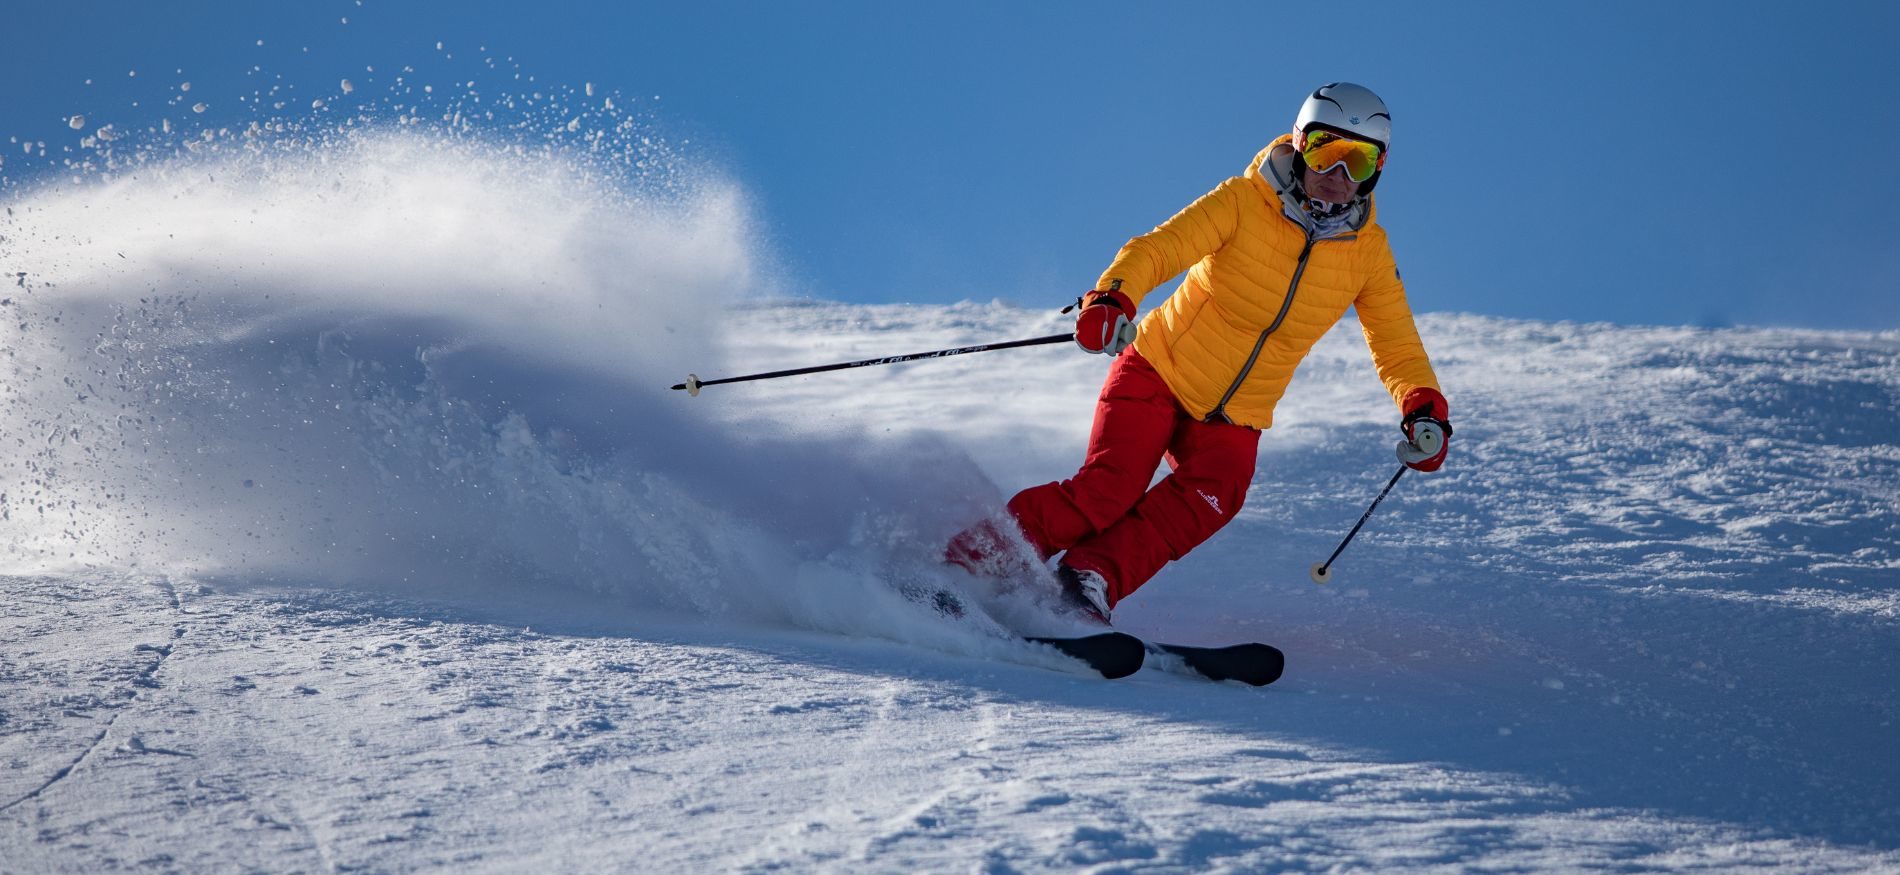 A person in a bright skiing outfit skiing down a mountain